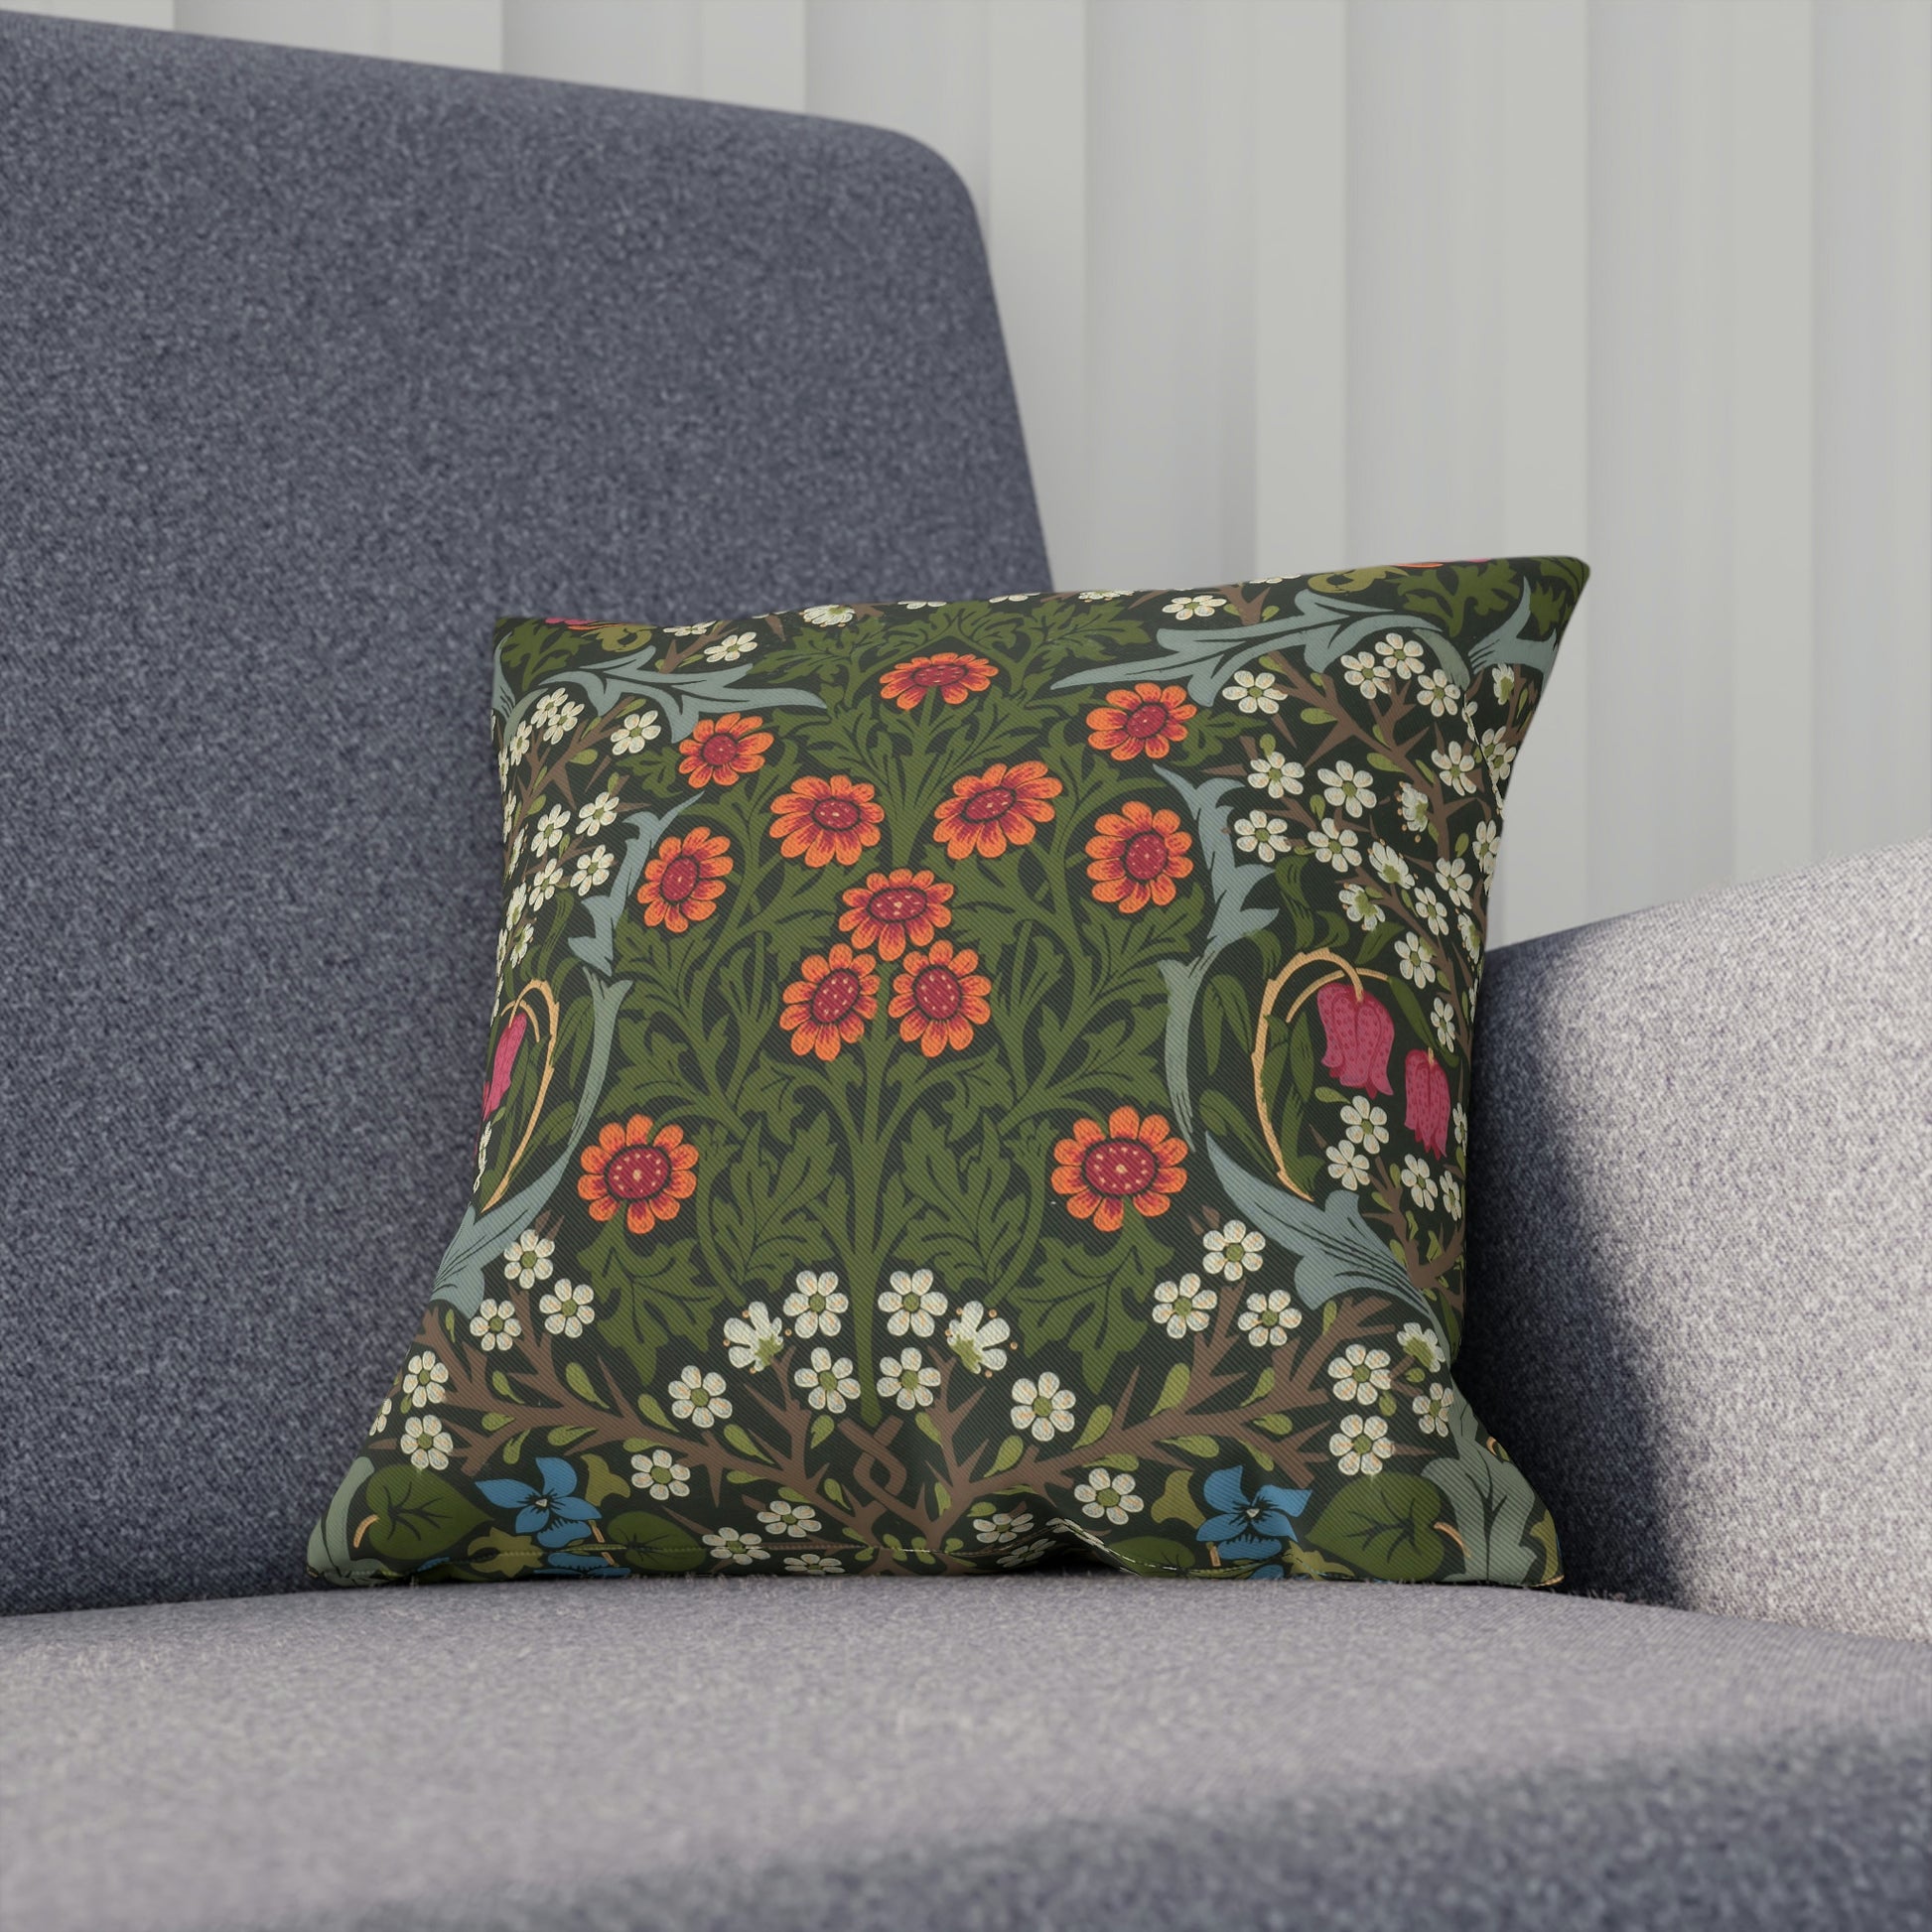 william-morris-cushion-and-cushion-cover-blackthorn-collection-6